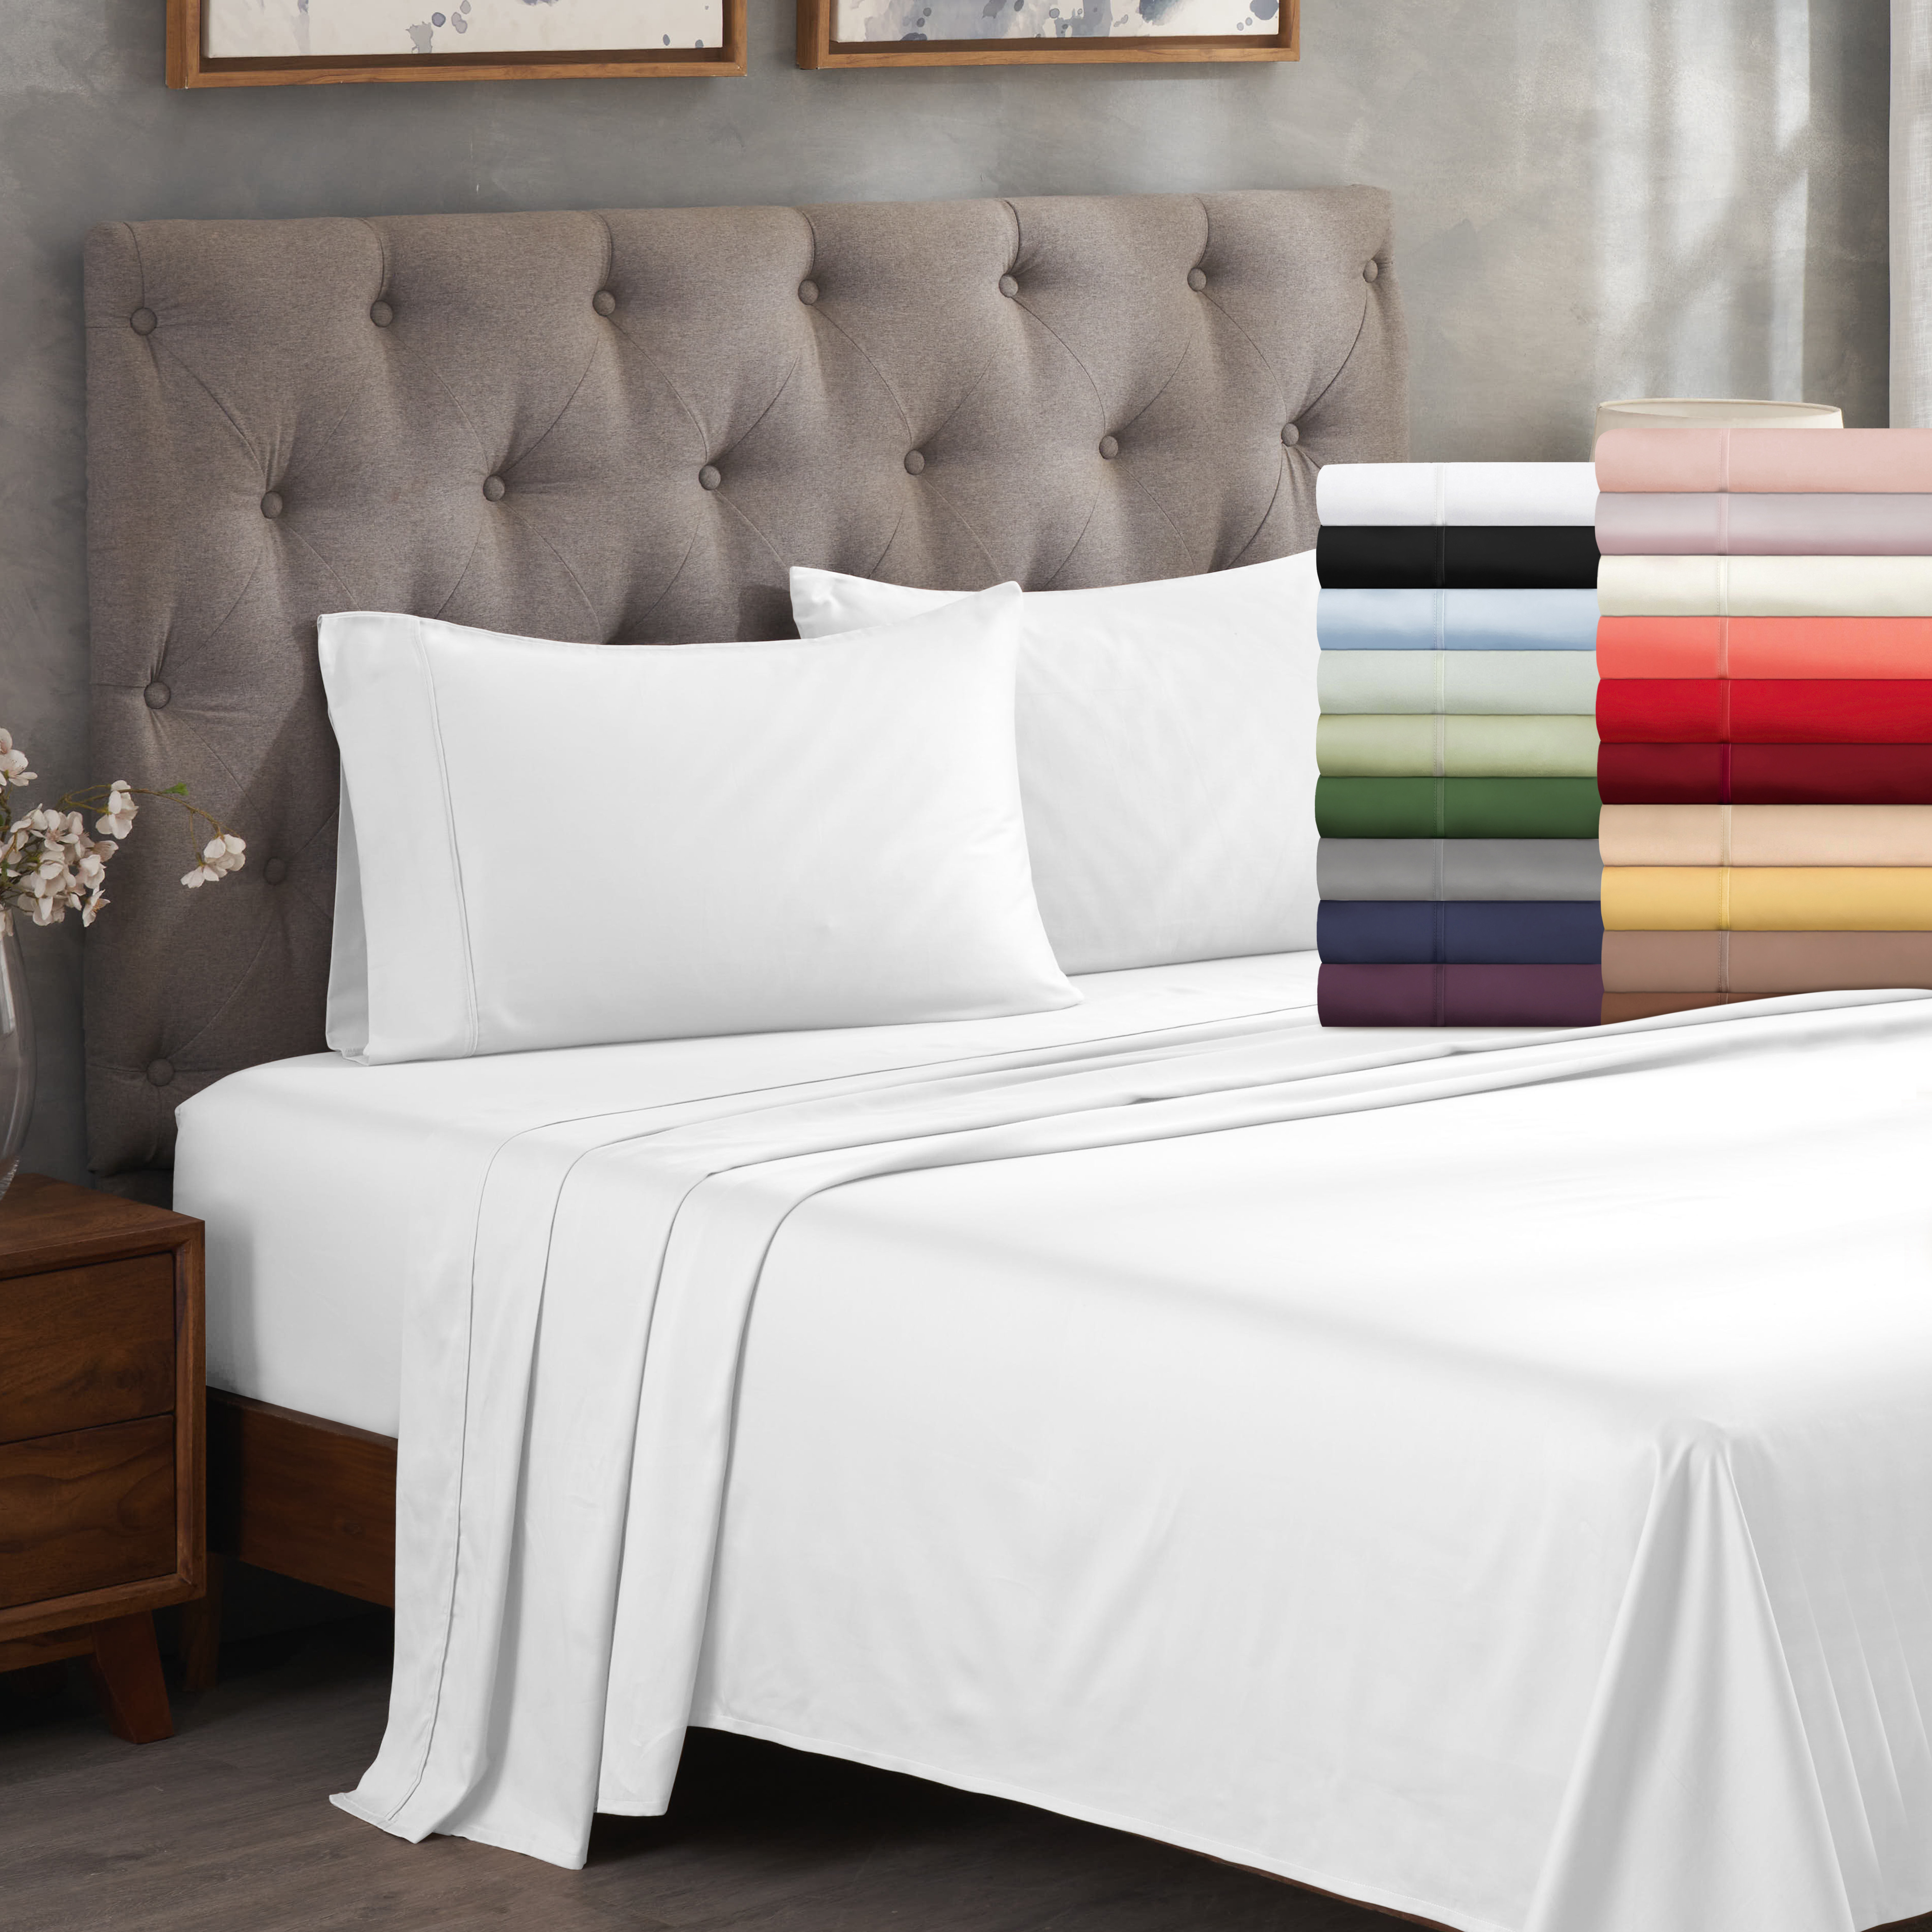 180-300 Thread Count Sheets & Pillowcases - Way Day Deals!